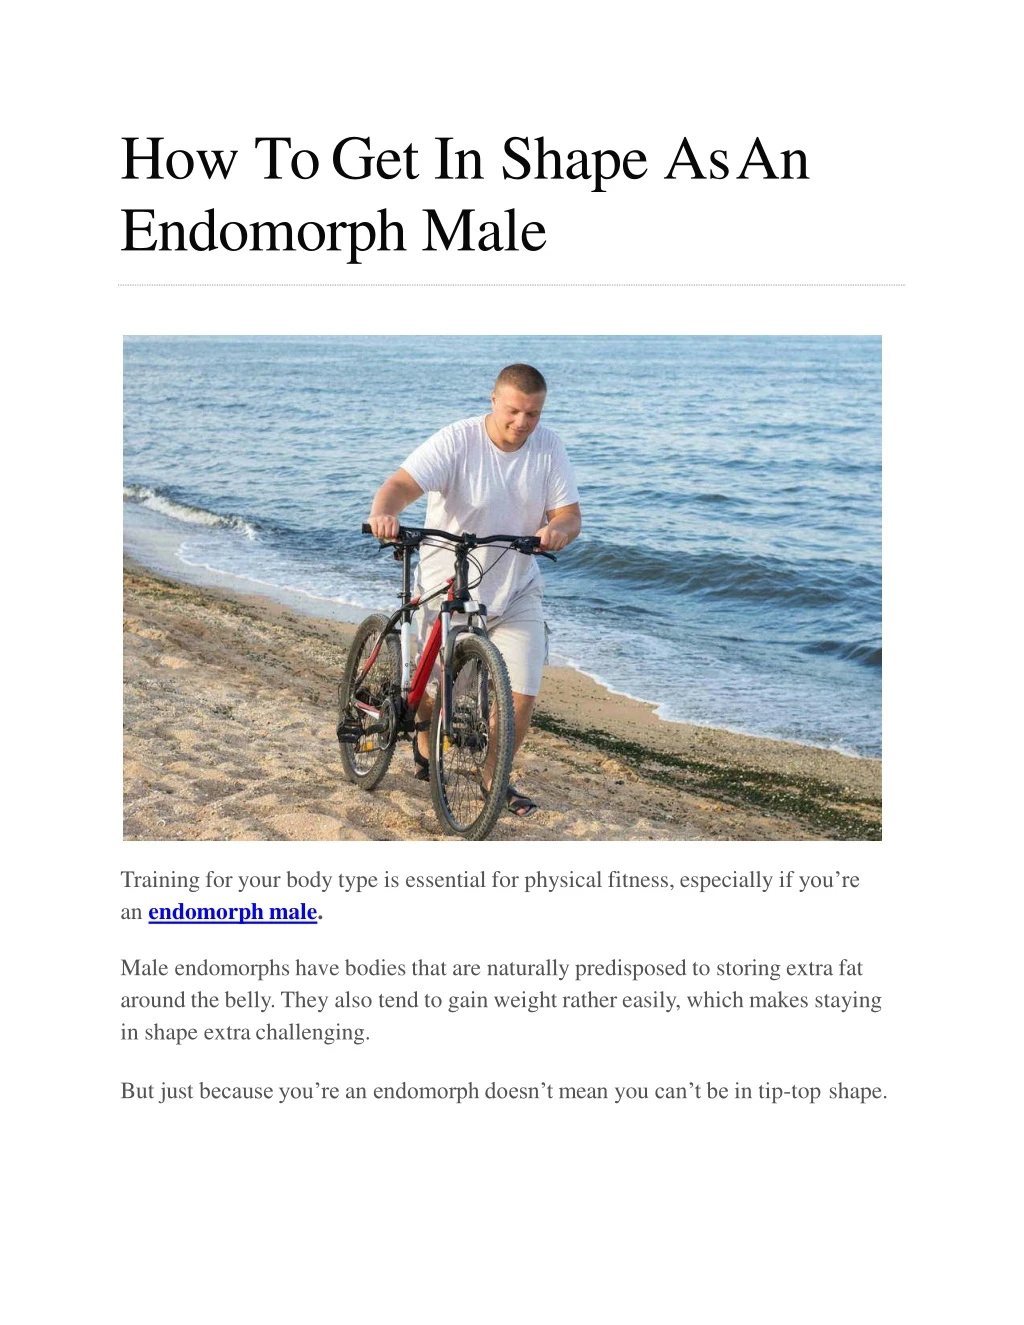 how to get in shape as an endomorph male